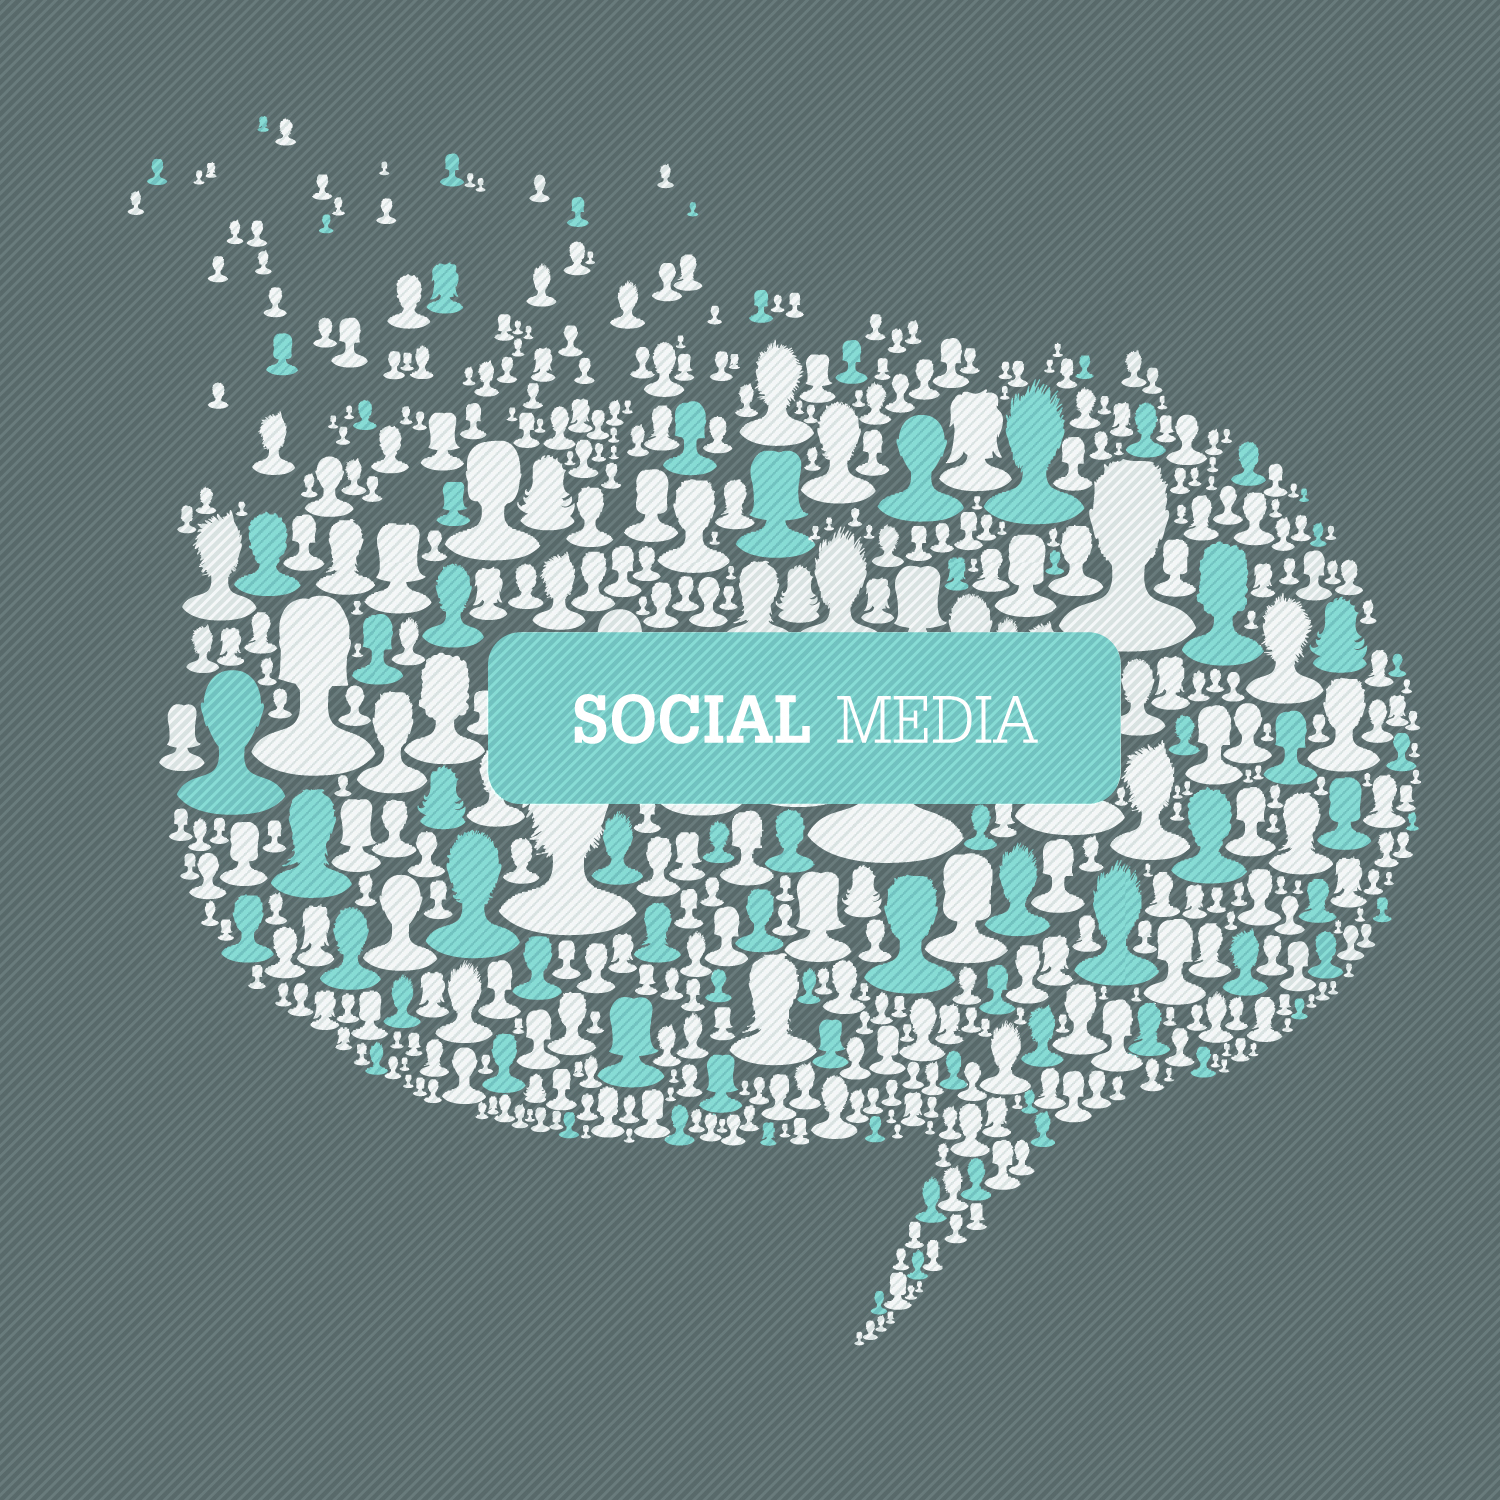 Social Media Marketing – Are you Staying Compliant?